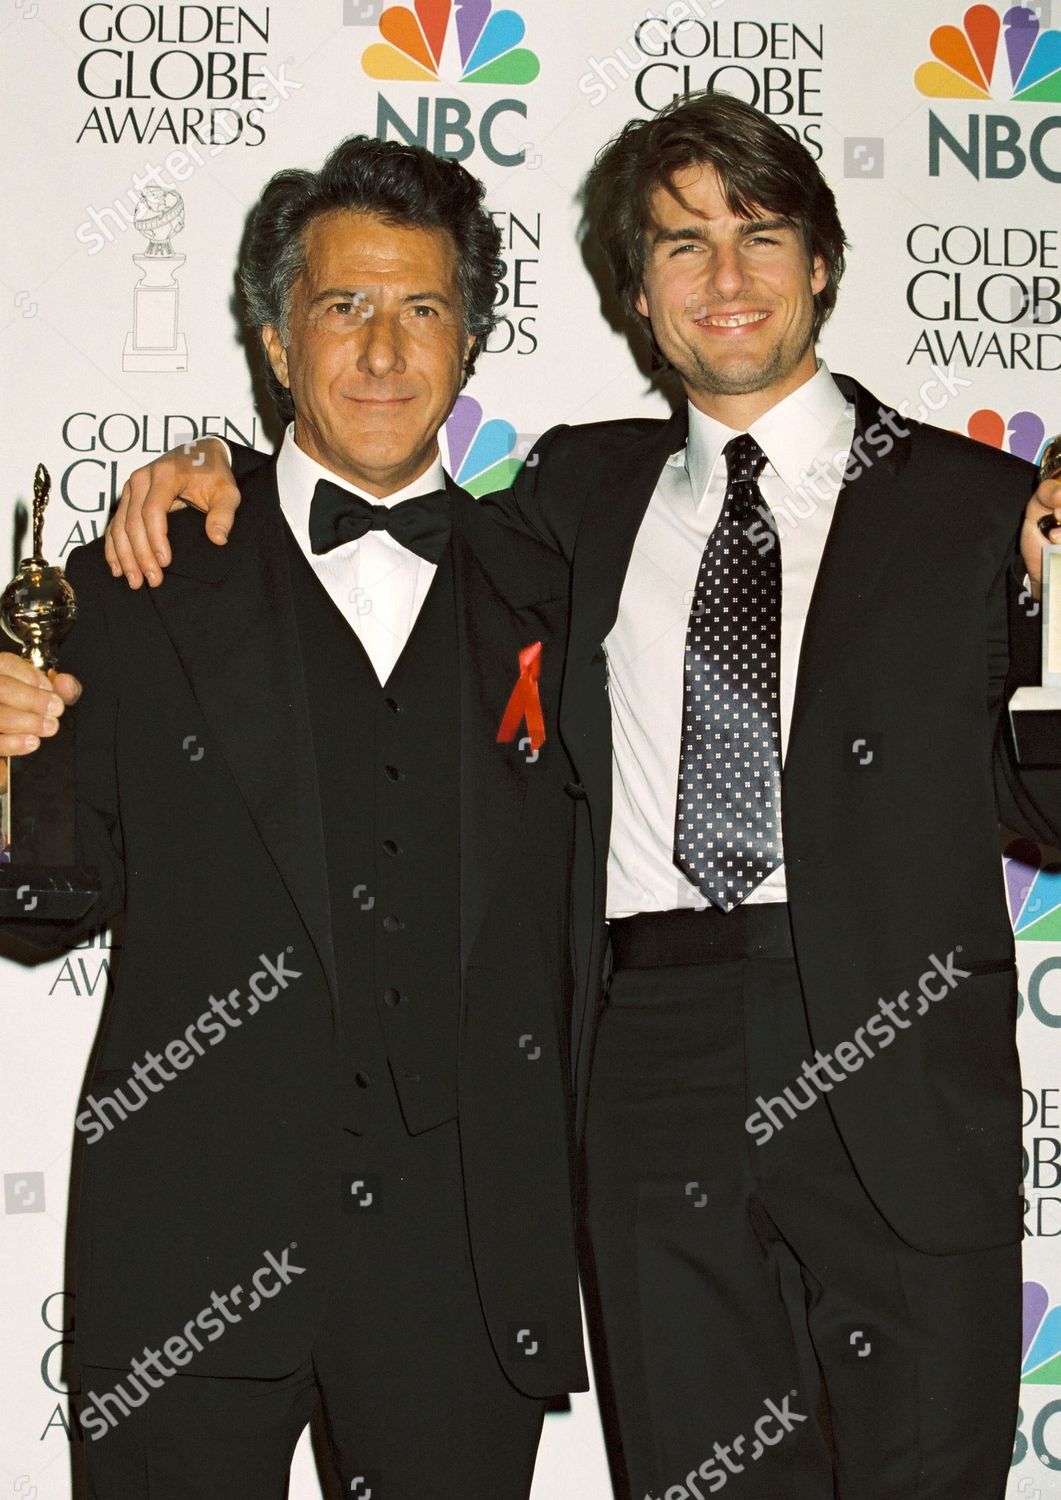 ¿Cuánto mide Tom Cruise? - Altura - Real height - Página 6 54th-annual-golden-globes-award-room-shutterstock-editorial-4374450h